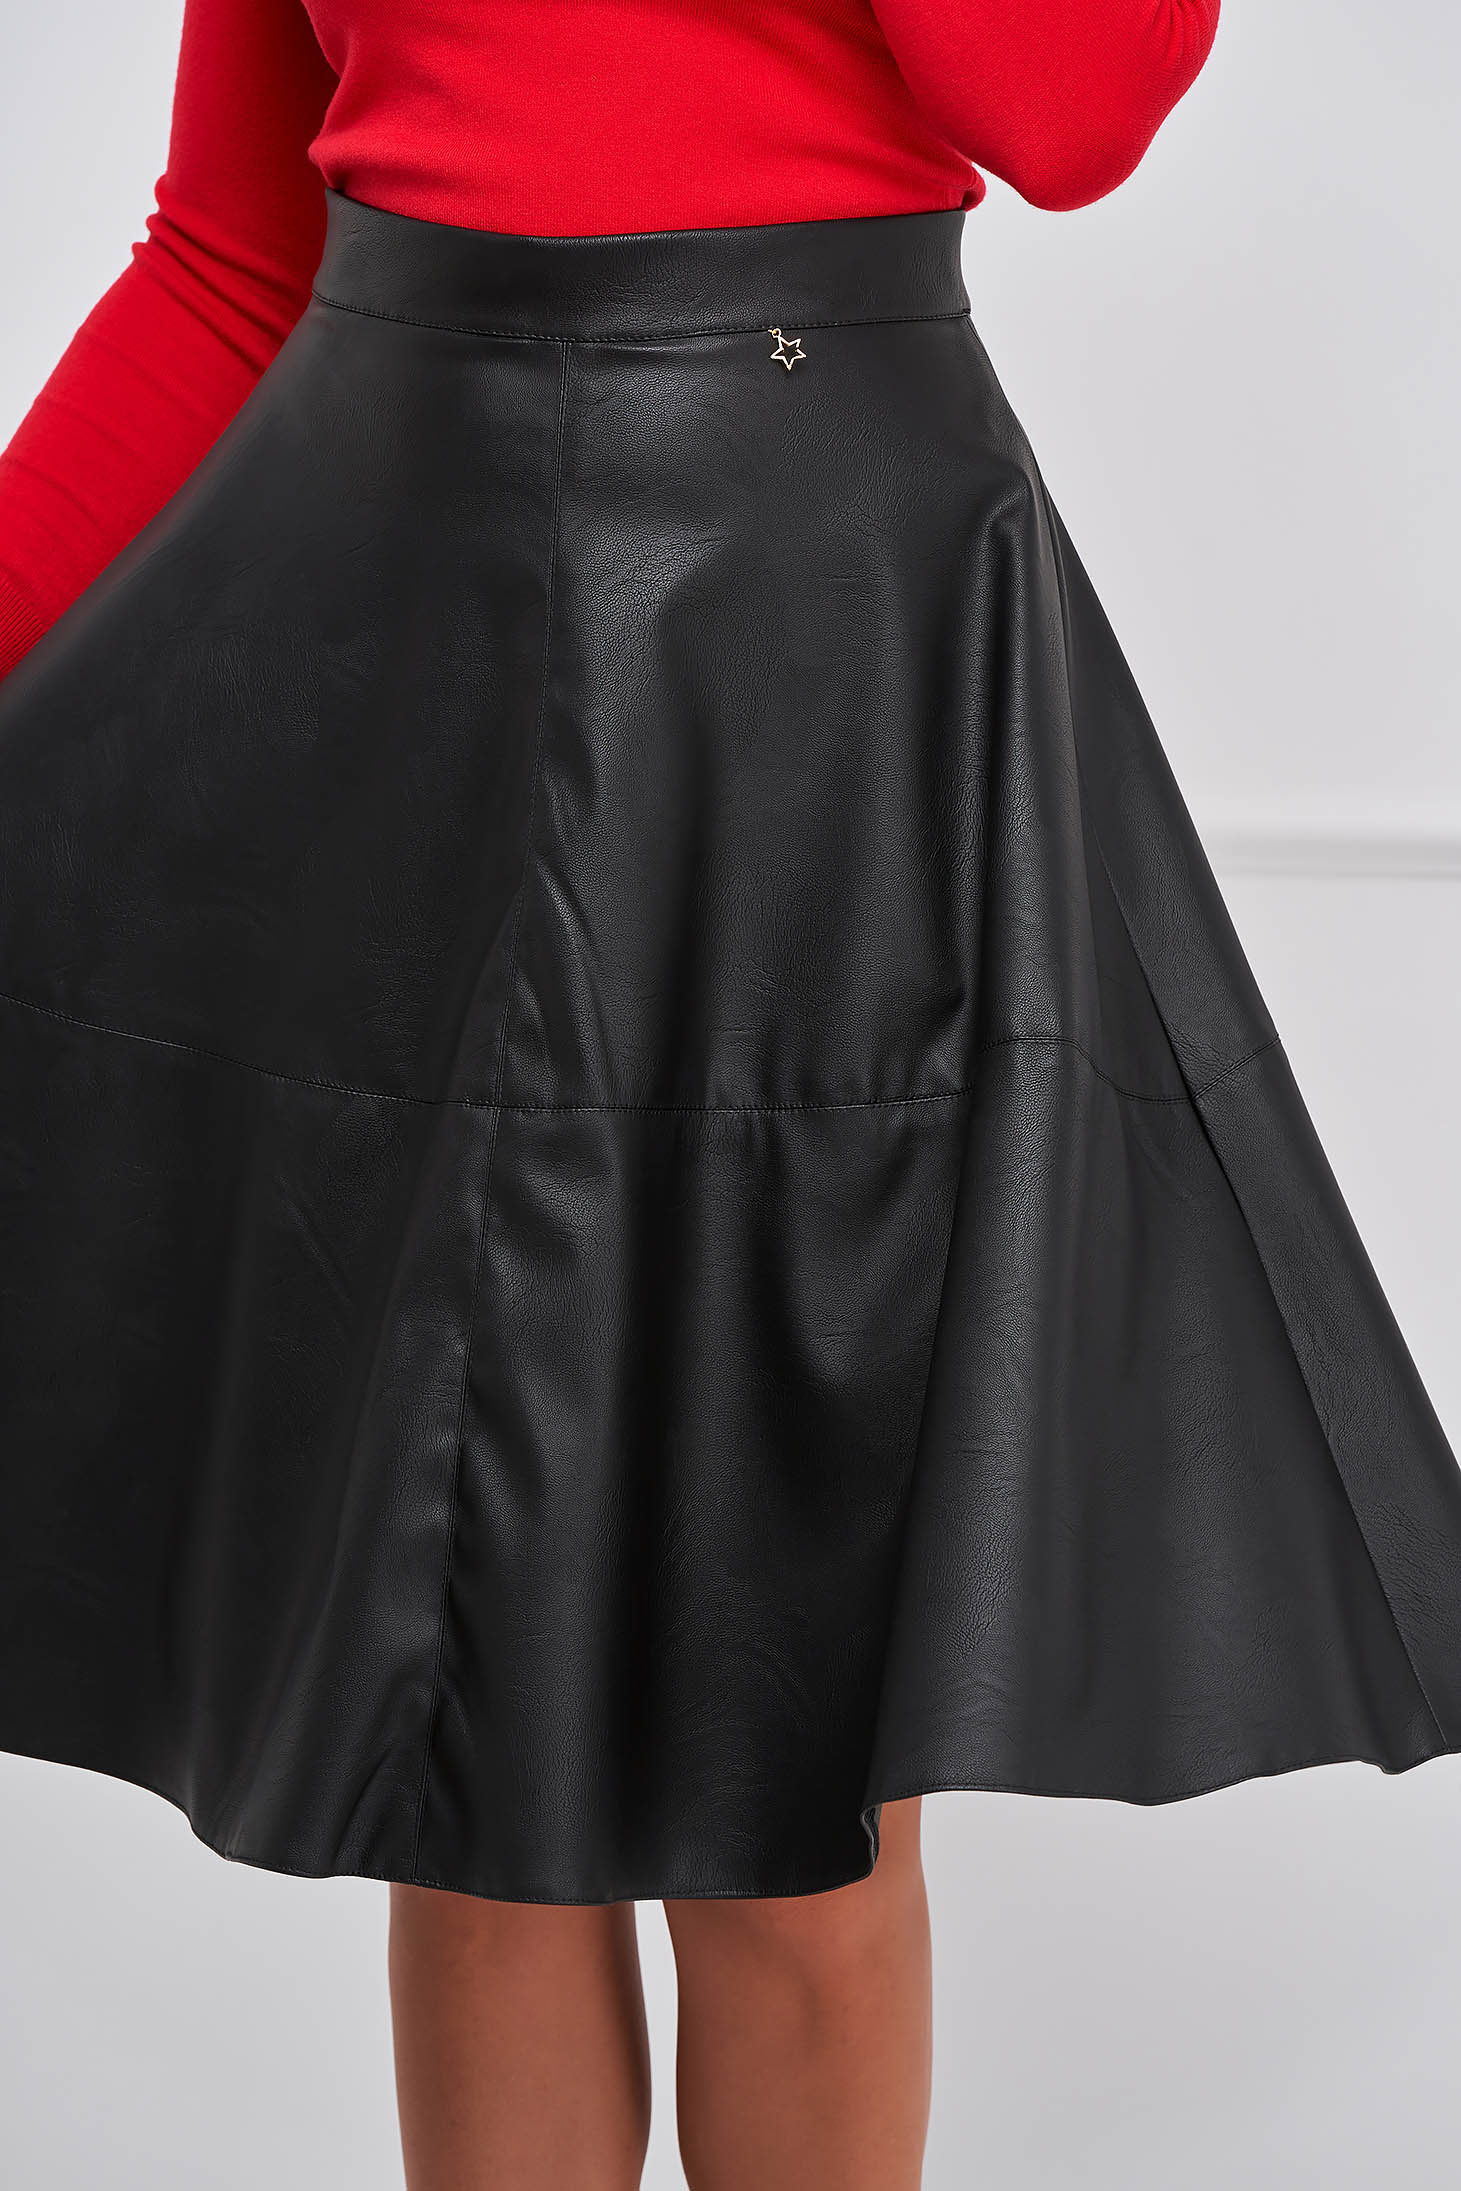 Black Cloche Skirt From Ecological Leather Midi Starshiners 9528